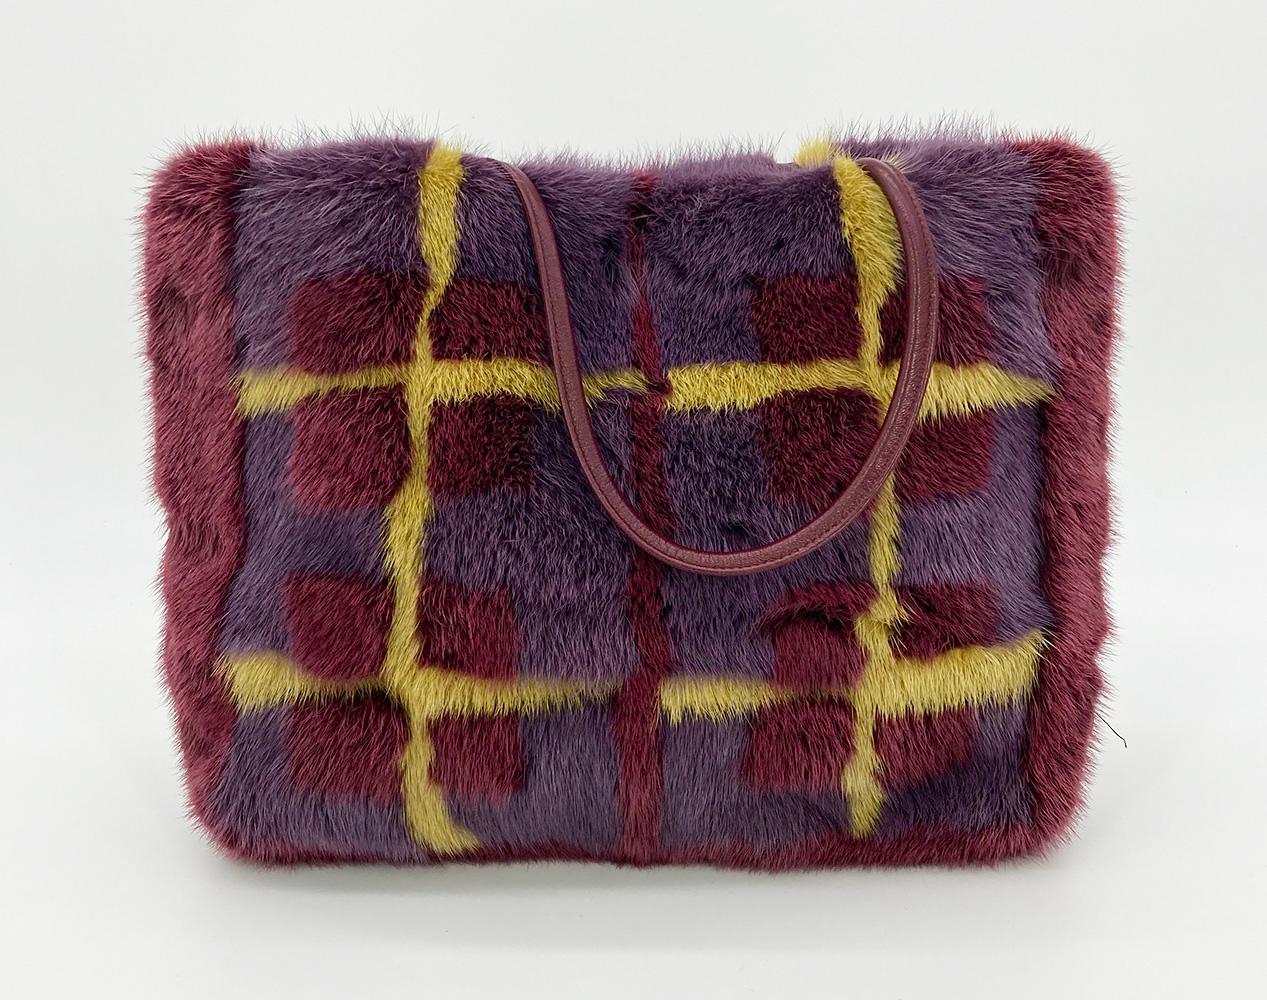 Vintage Guliana Teso Maroon Plaid Prink Mink Fur Handbag in excellent condition. Maroon mink exterior with yellow and purple plaid print. Double top maroon leather handles. Top magnetic snap closure opens to a black nylon branded interior with one